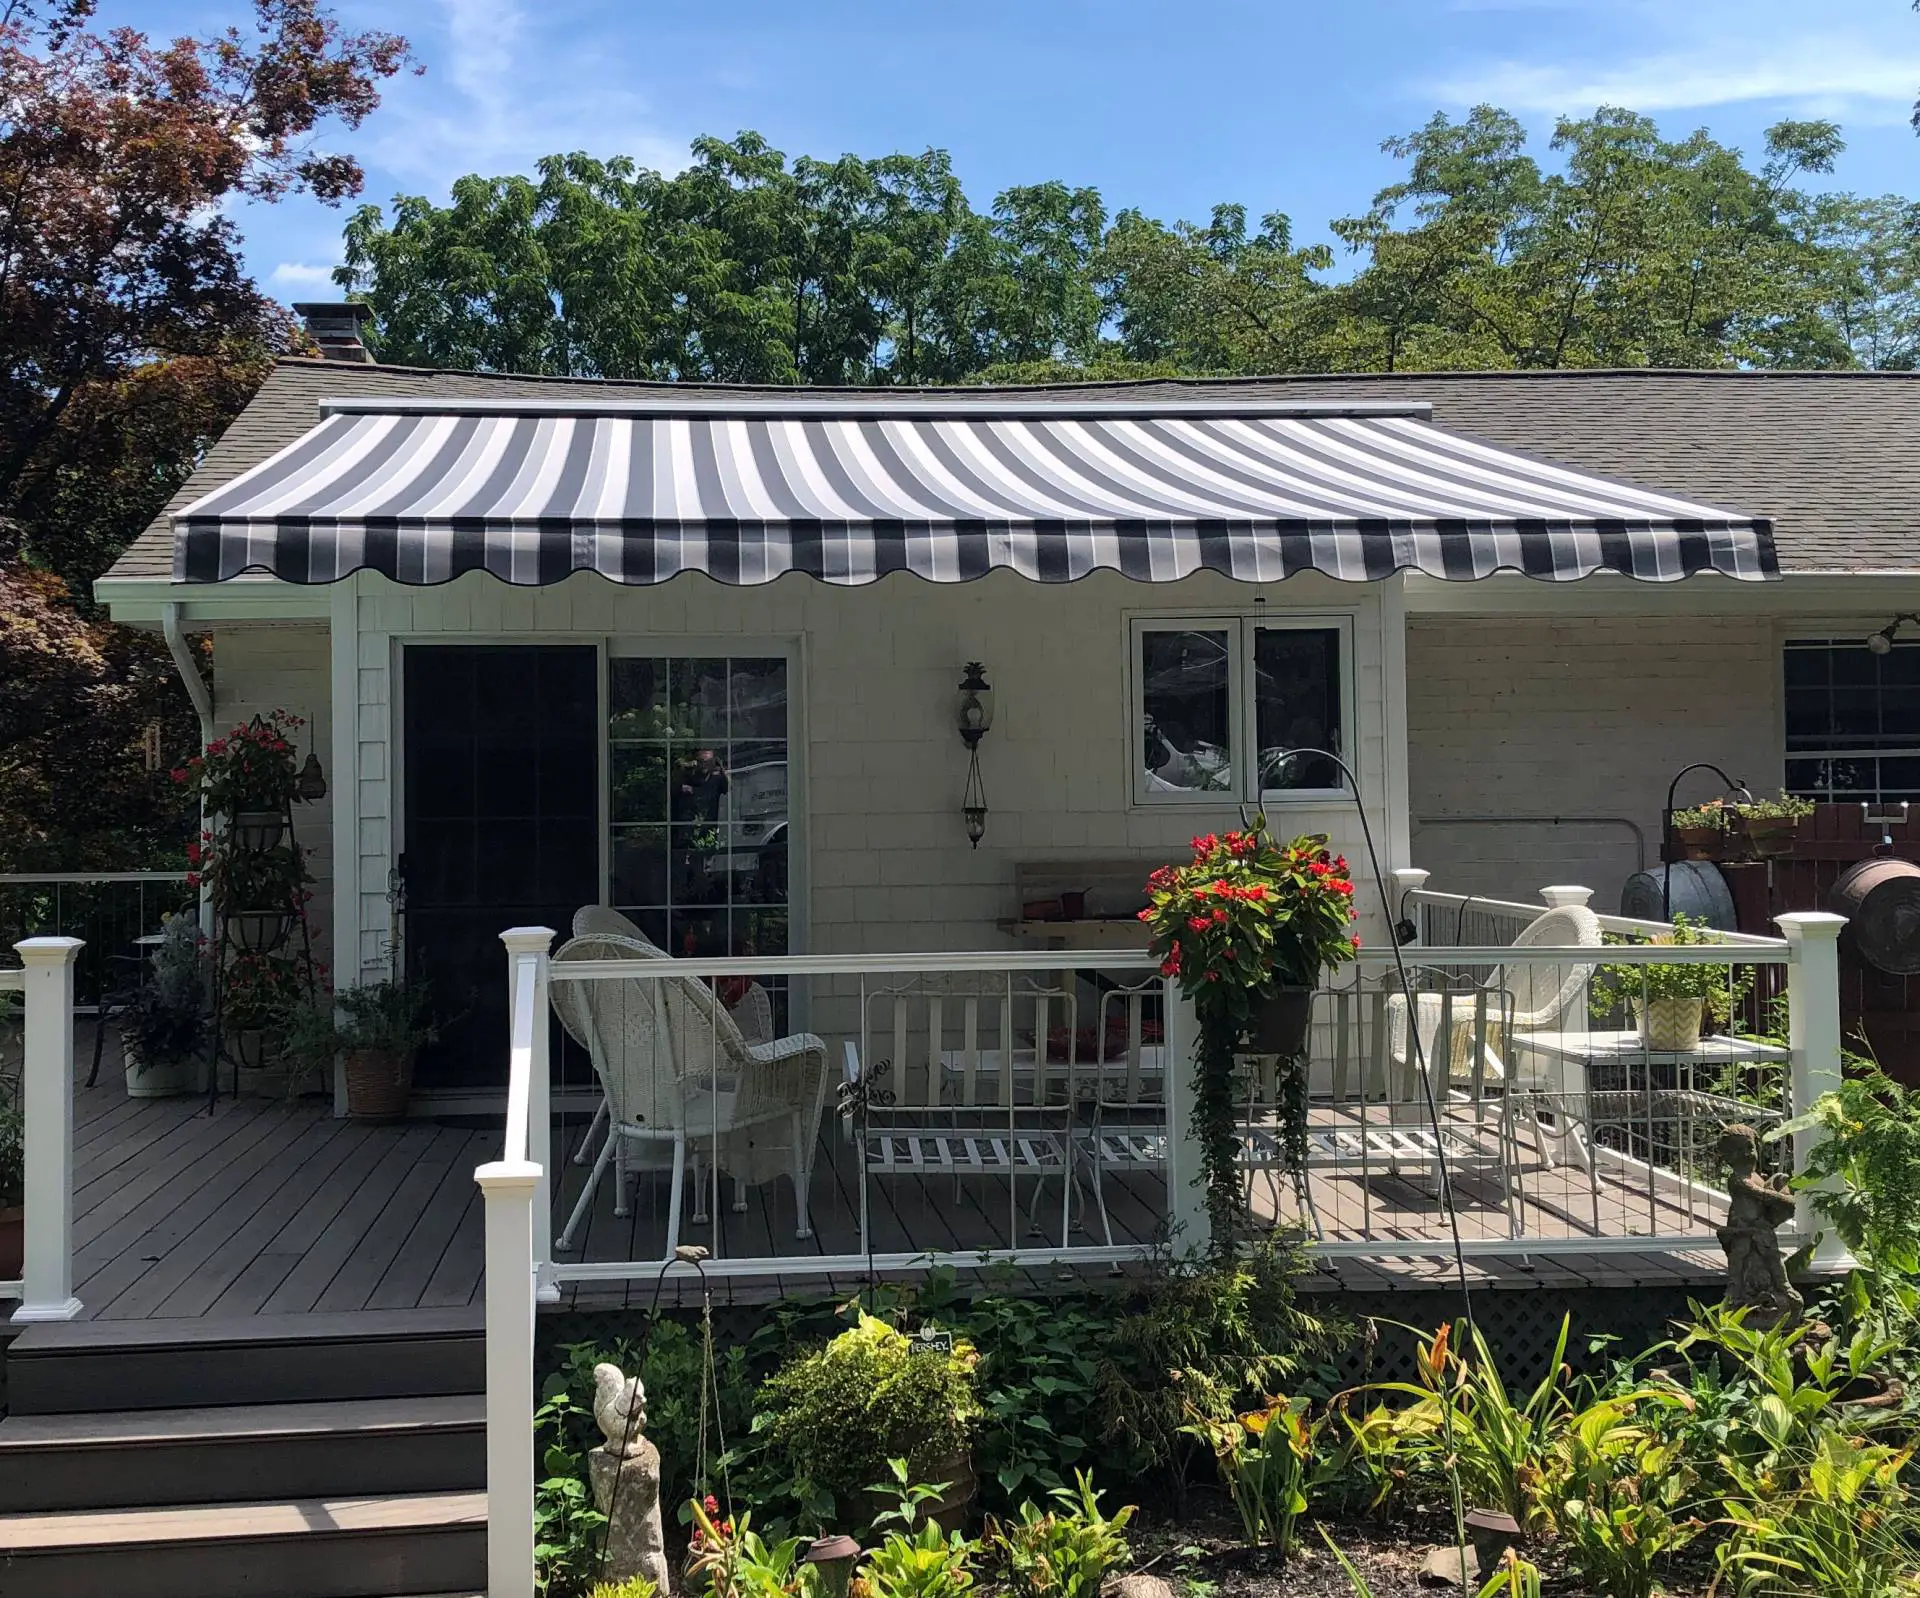 Eastern " Sunflex"  retractable awning